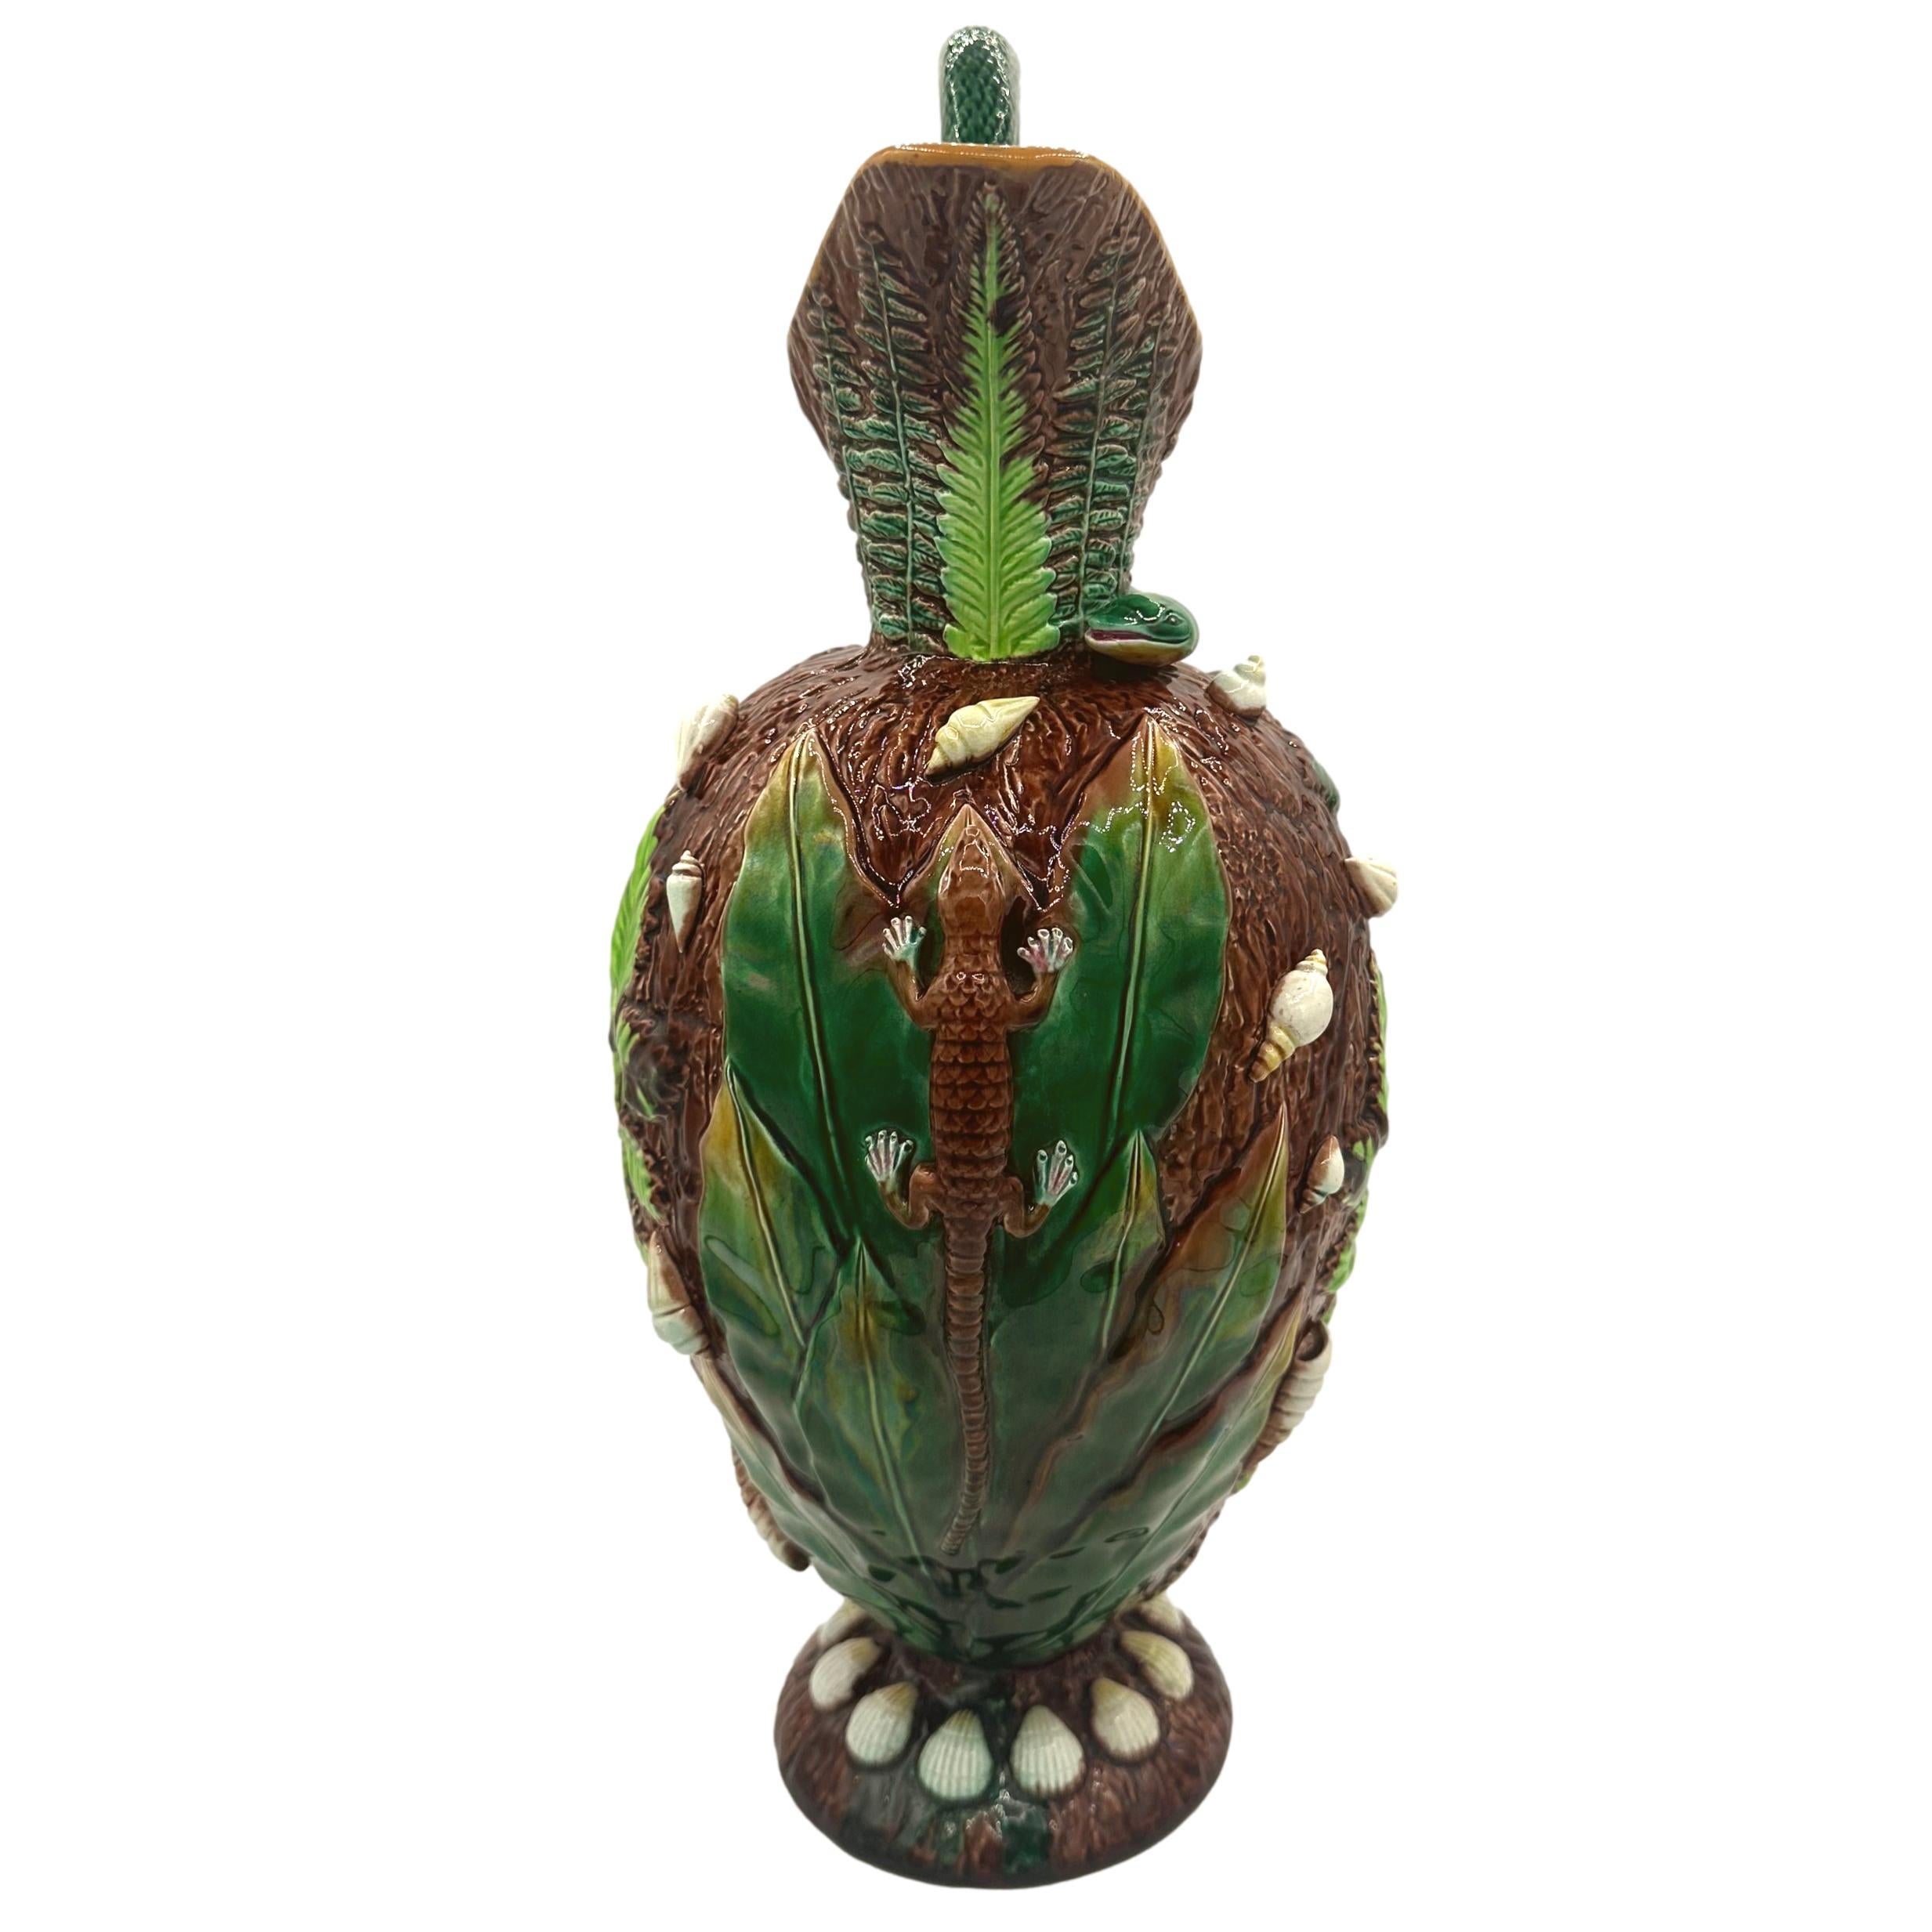 19th Century A George Jones Majolica 'Palissy Vase' with Snake Handle, English, ca. 1870 For Sale